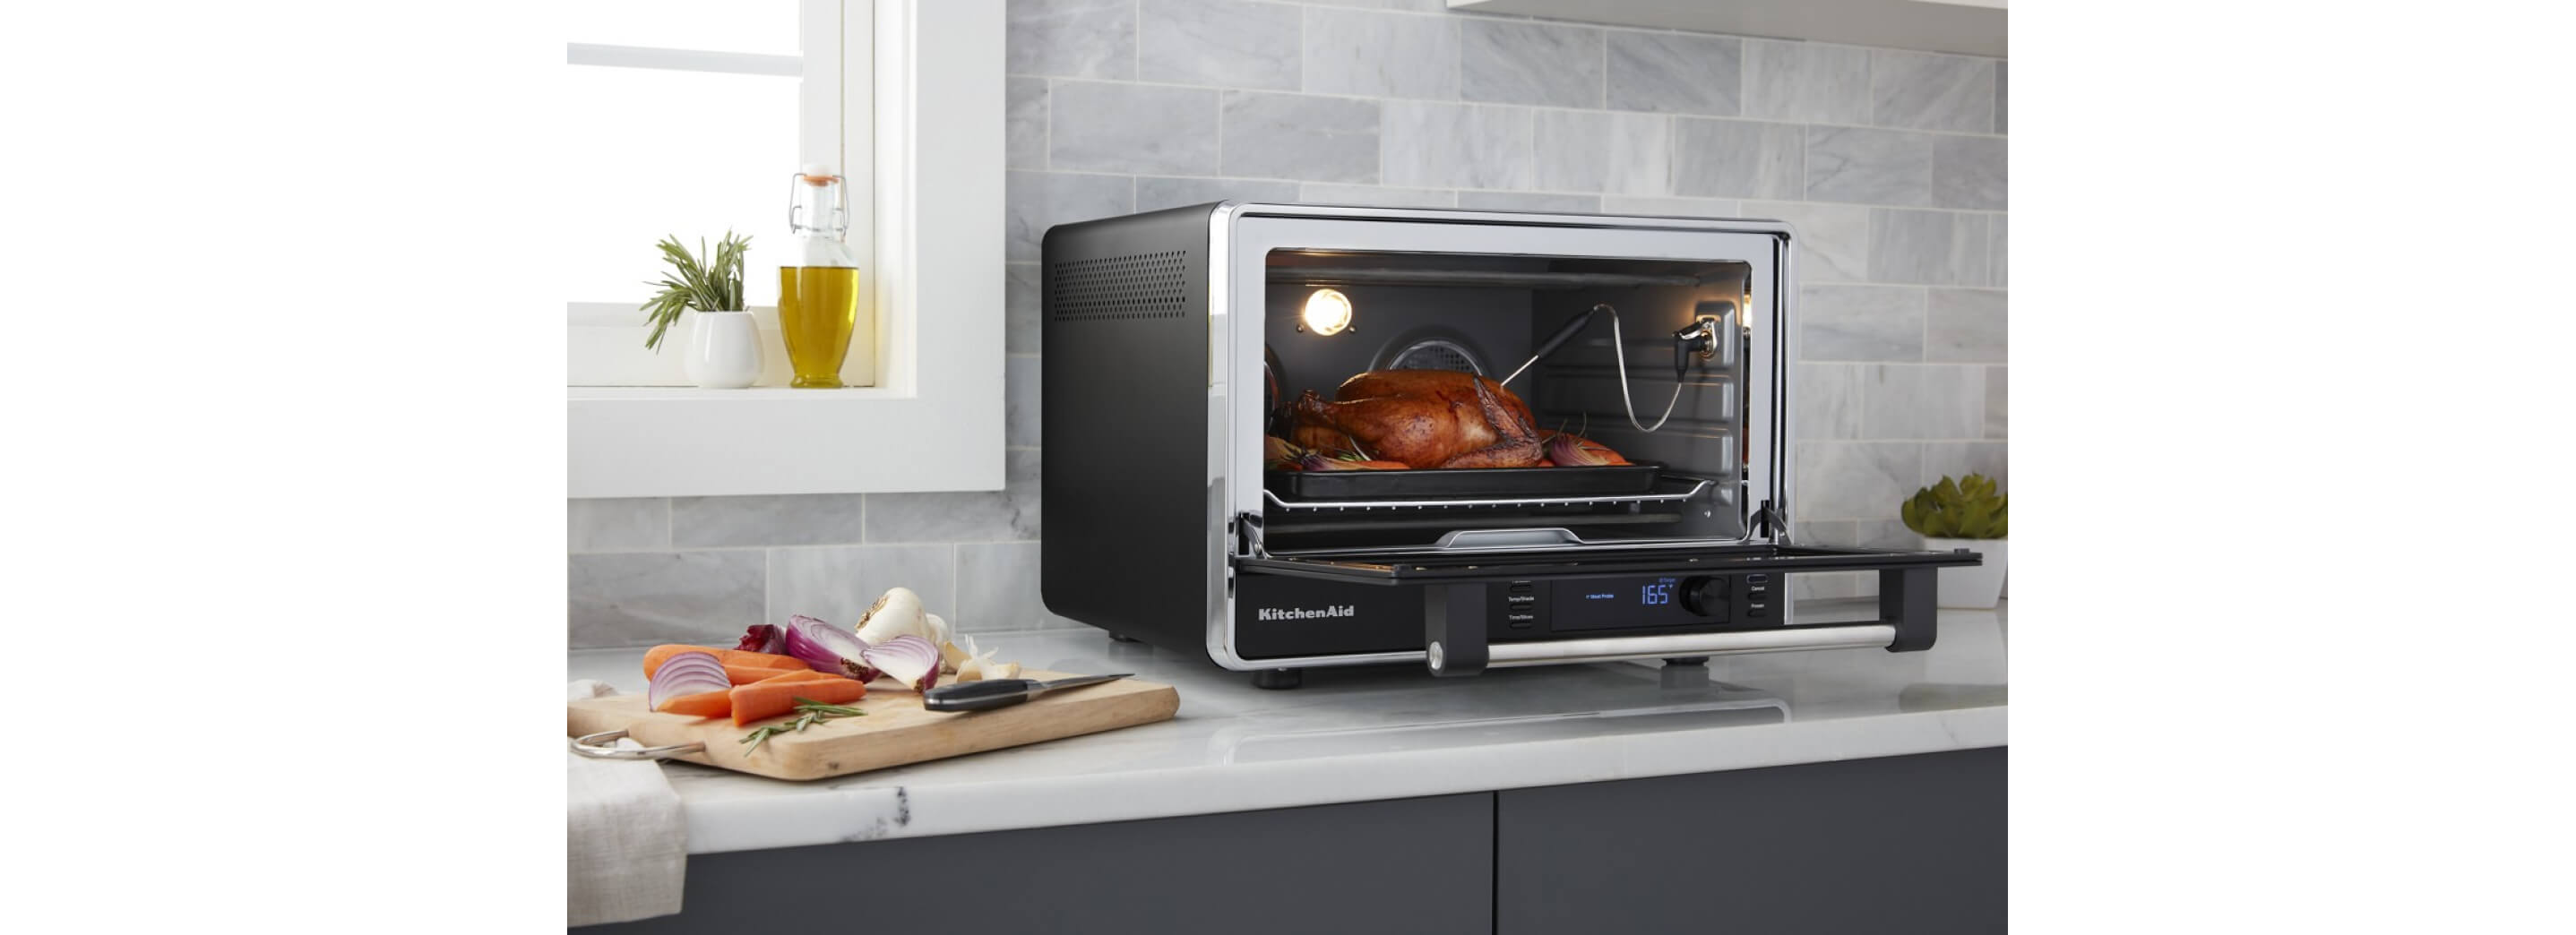 Sommerhus frihed Reception Countertop Ovens, Toaster Ovens & Air Fryers | KitchenAid